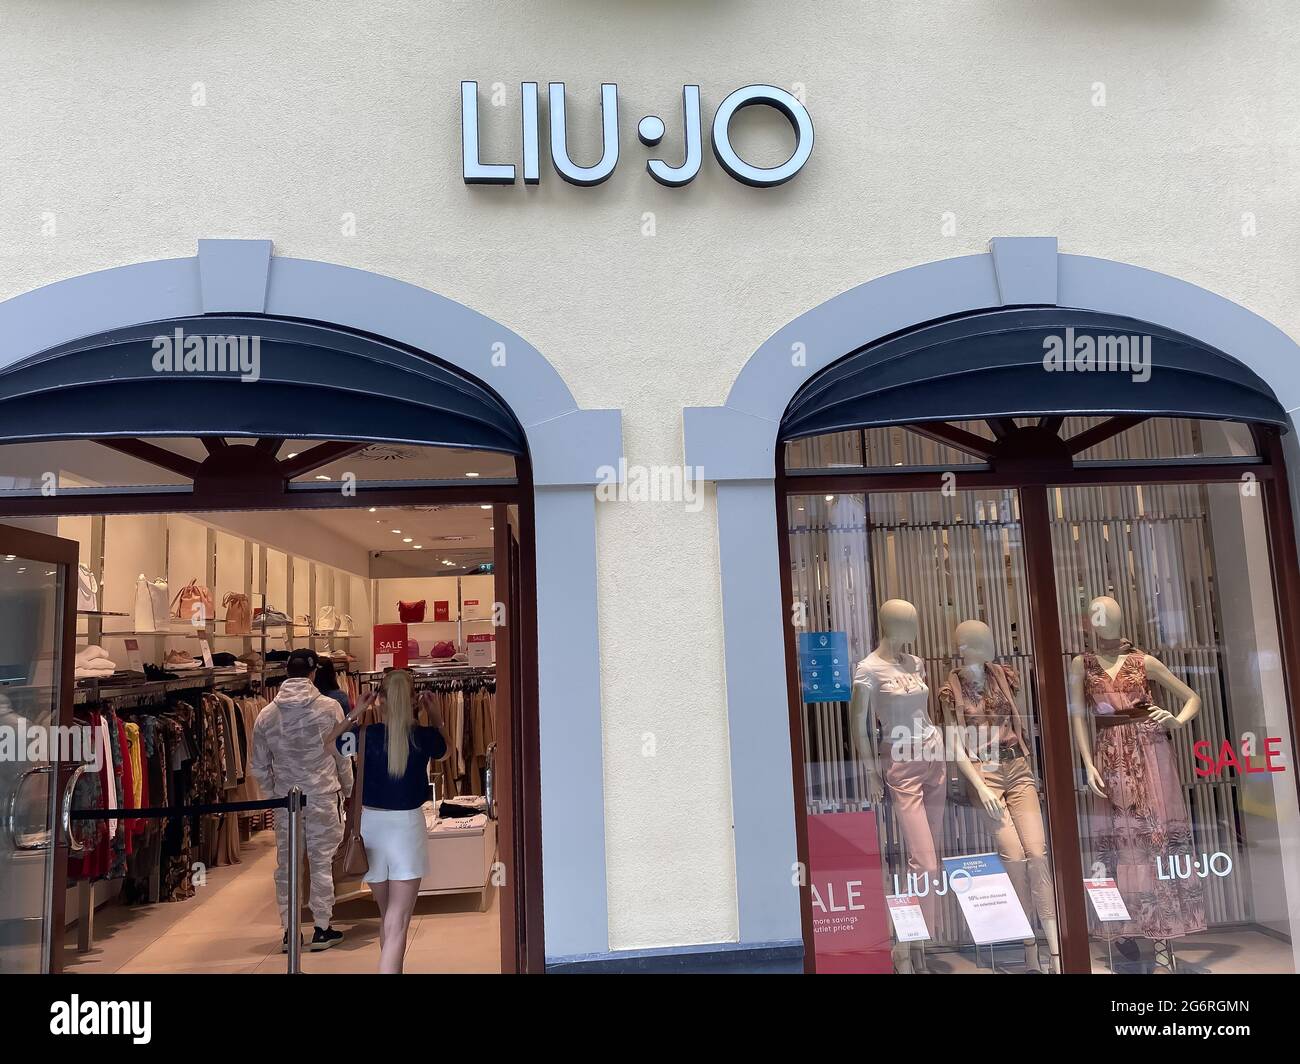 Roermond, Netherlands - July 1. 2021: View on store facade with logo lettering of liu jo fashion label Stock Photo